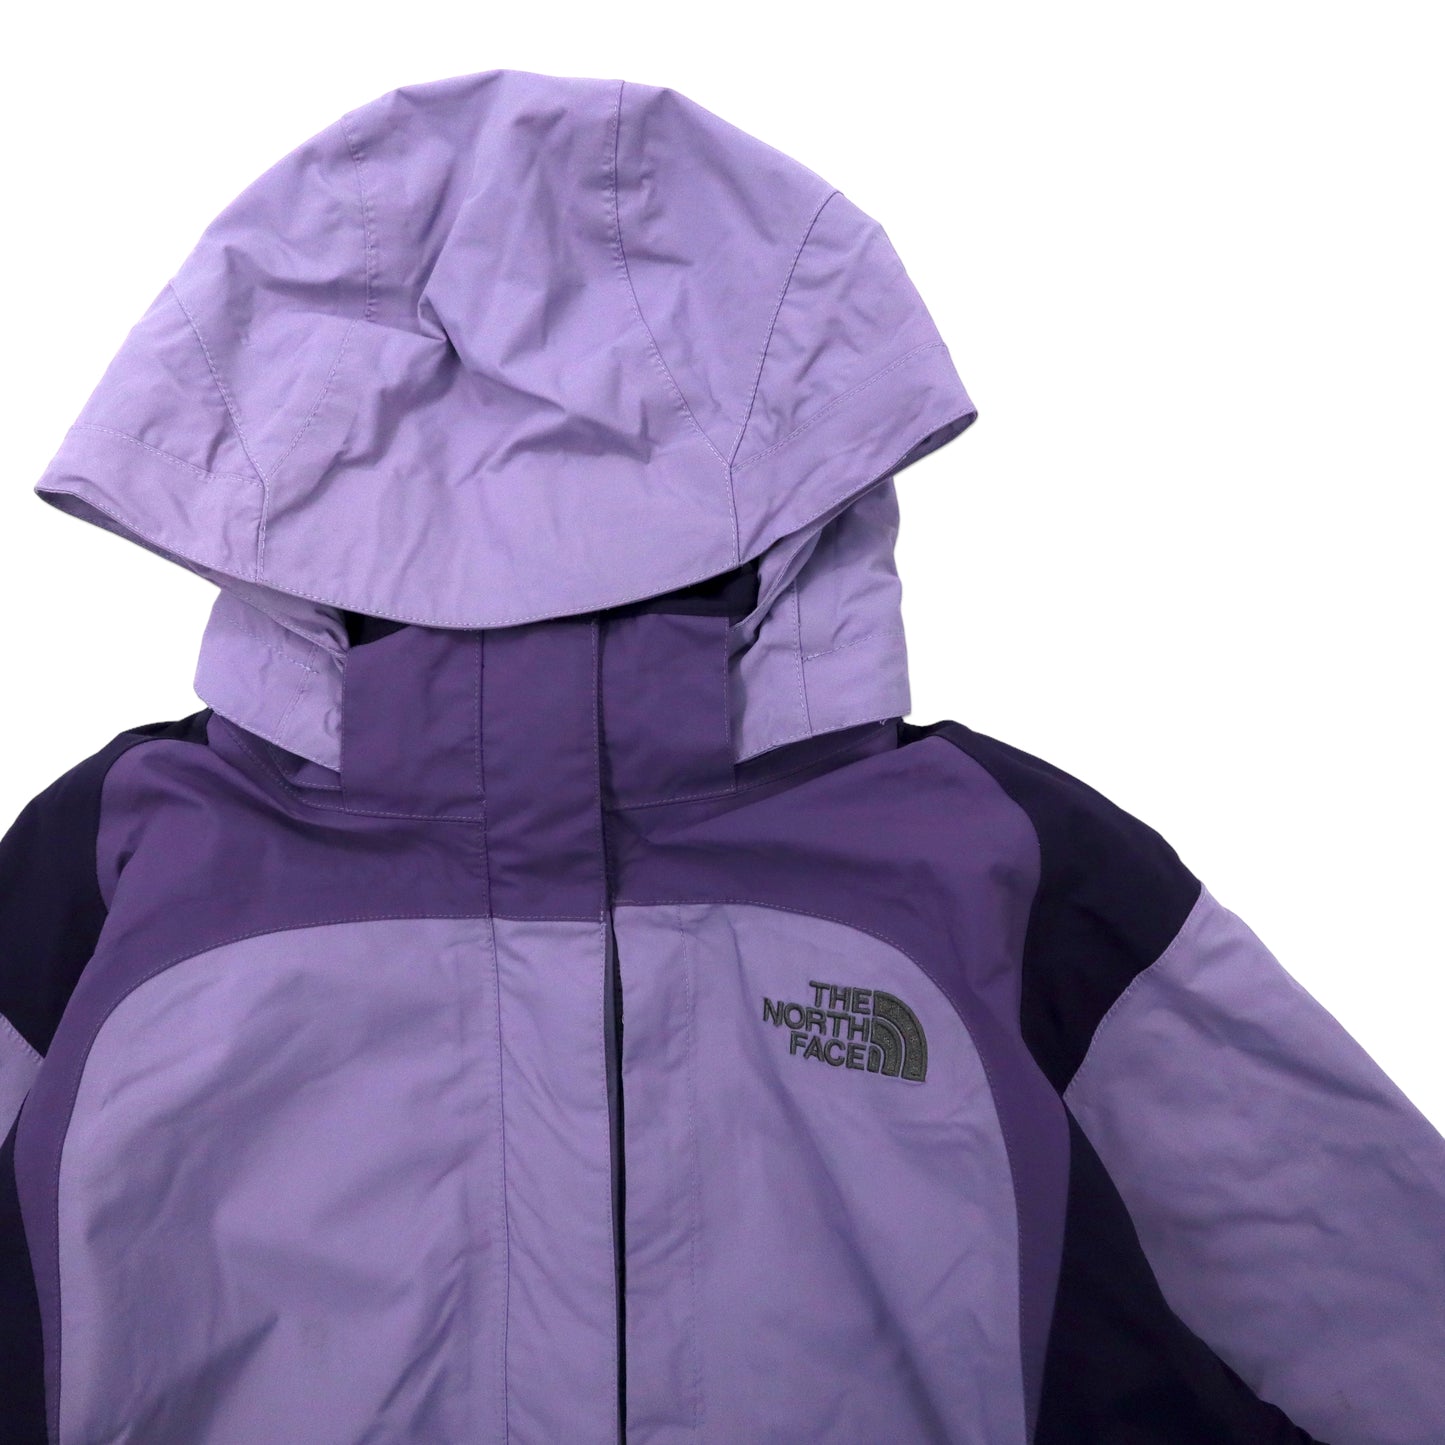 THE NORTH FACE Mountain HOODIE L Purple Nylon HYVENT Waterproof 